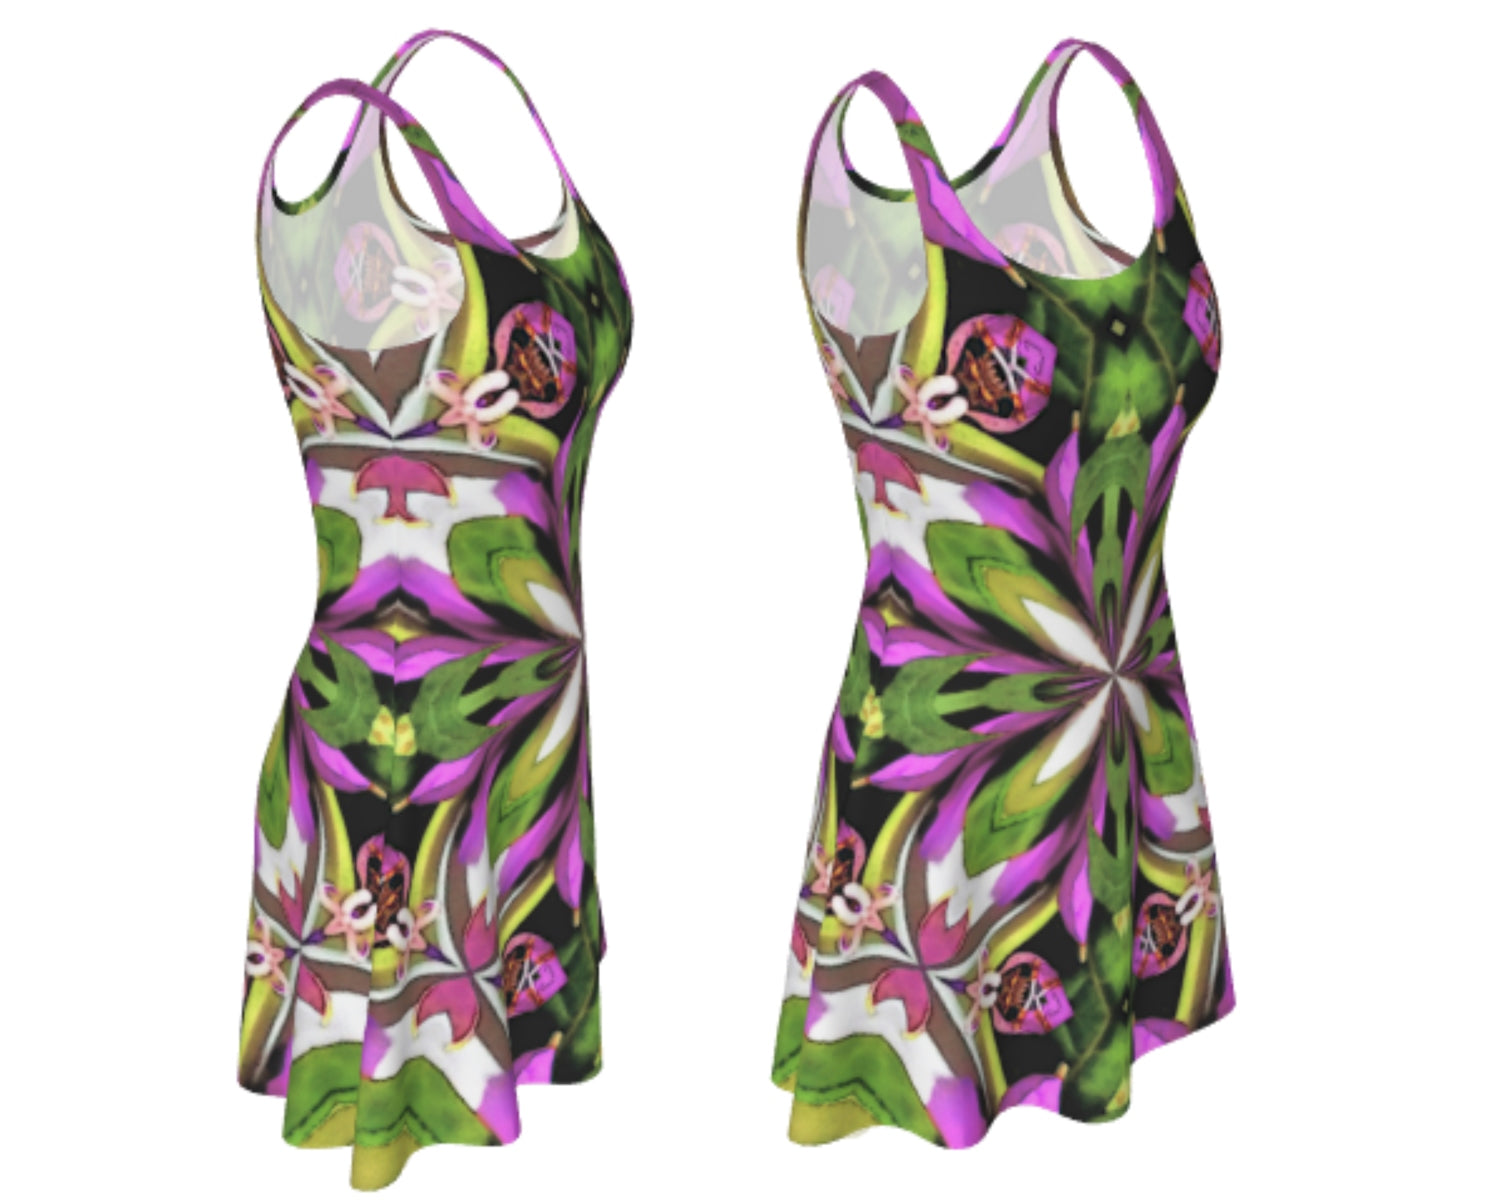 Flared short dress in brightly colored fractal print for costume or everyday